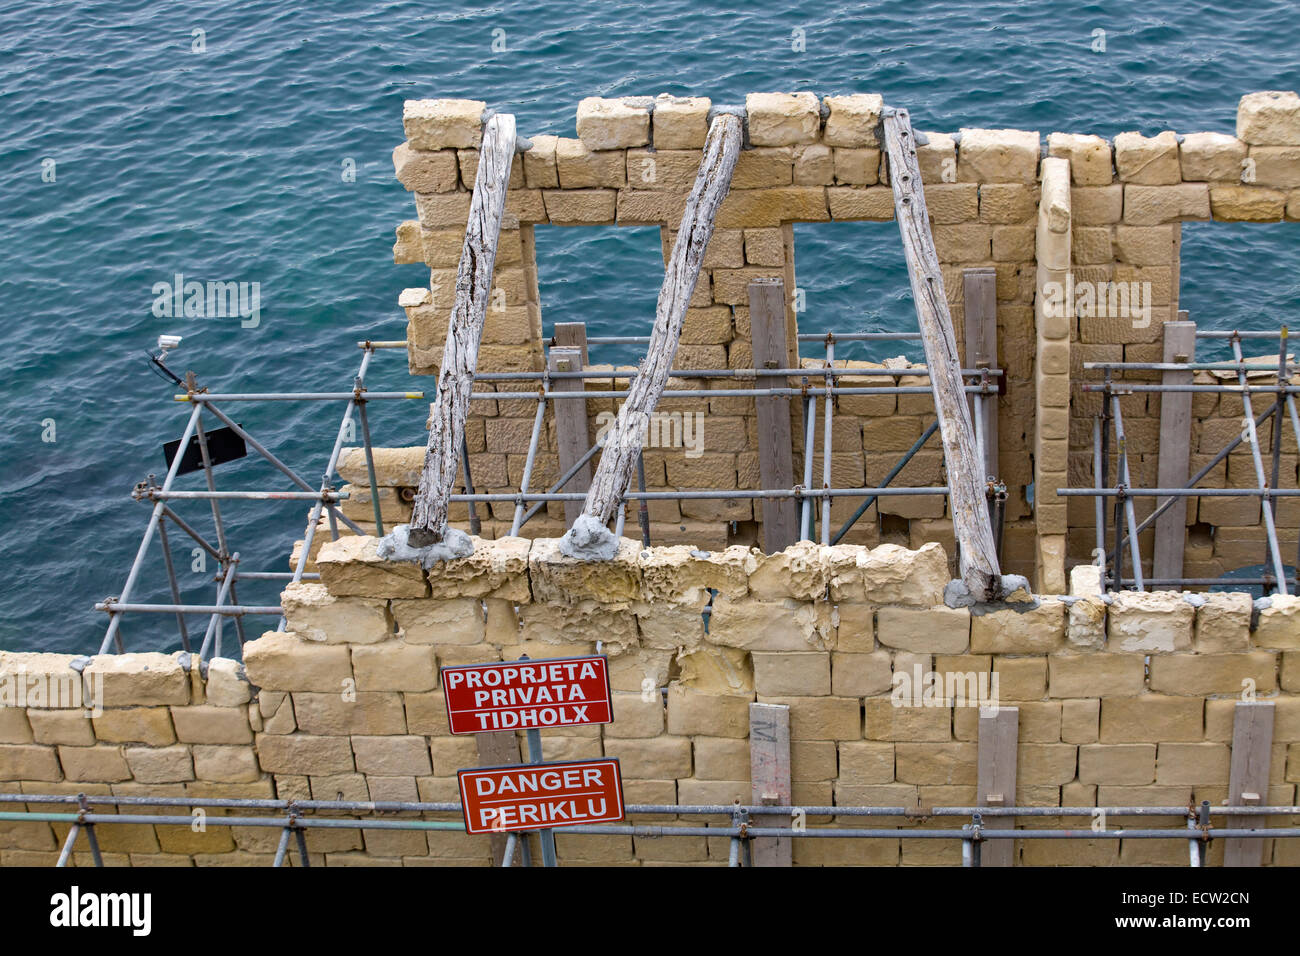 Scaffolding on a stone structure over the ocean Stock Photo